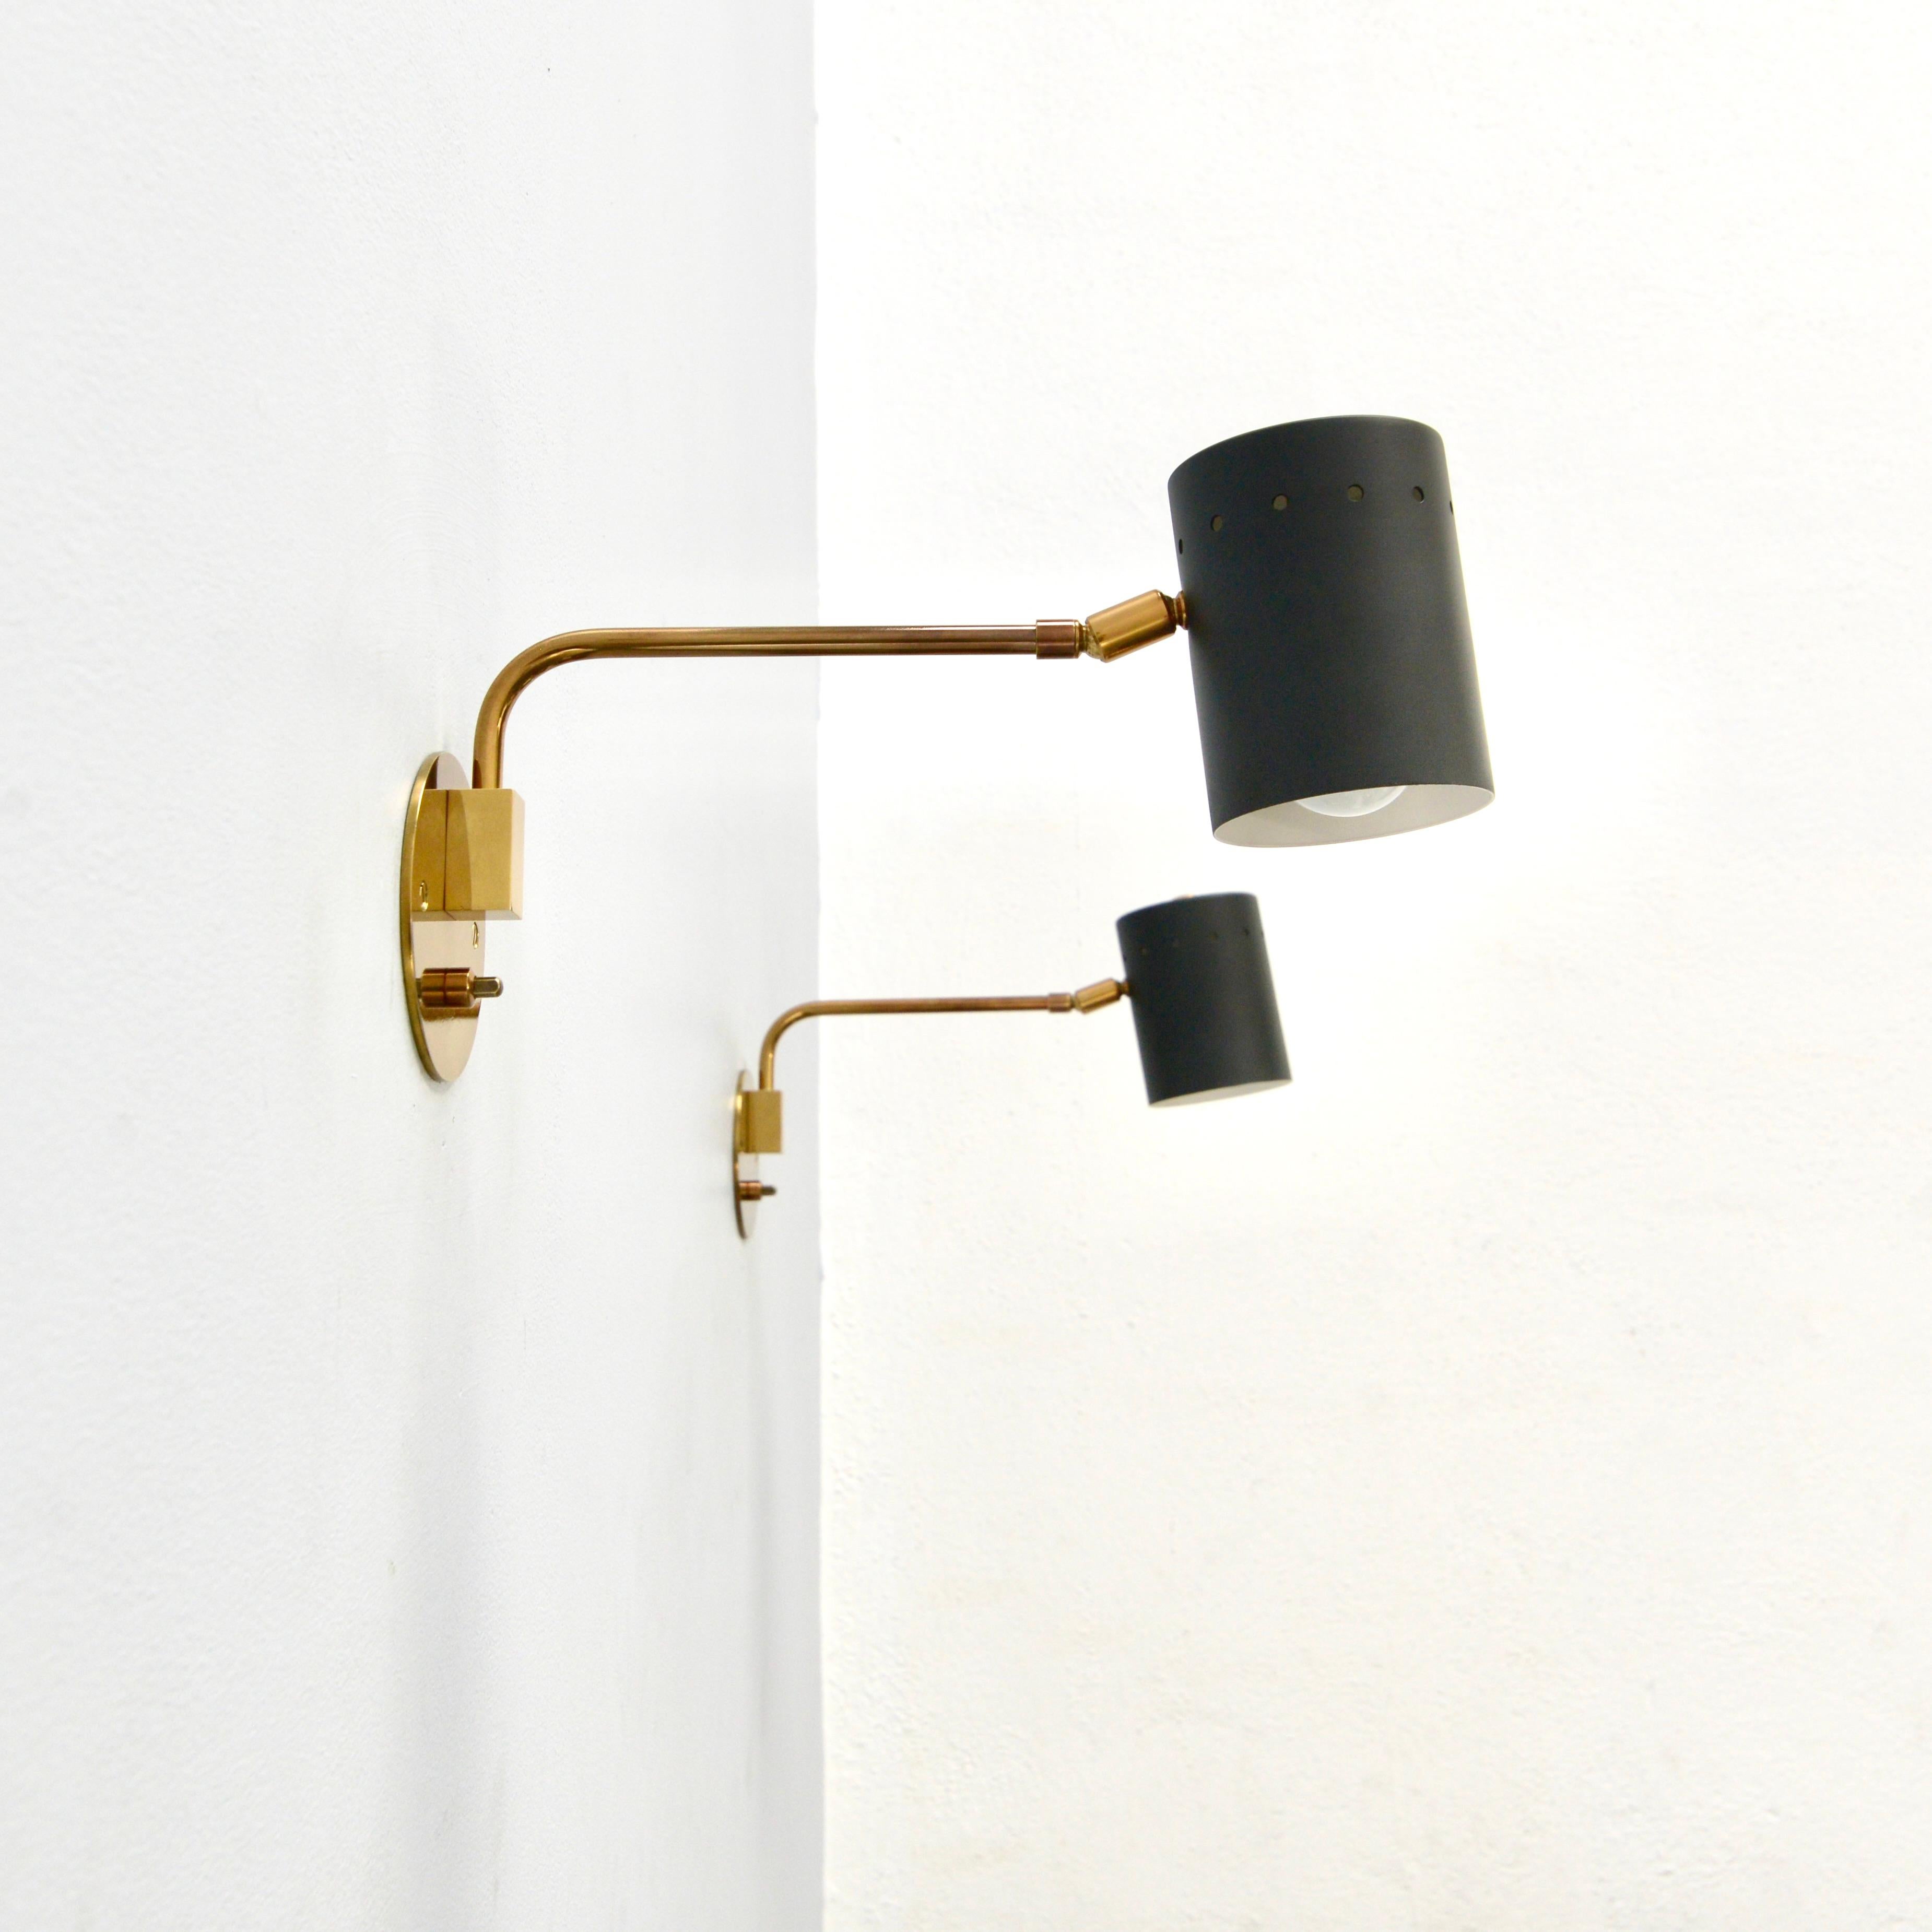 The versatile and elegant LURL Sconce by Lumfardo Luminaires is a mid-century Italian inspired wall sconce in lightly aged brass and painted aluminum. This sconce is made in the USA and is part of our contemporary collection. Often used for reading